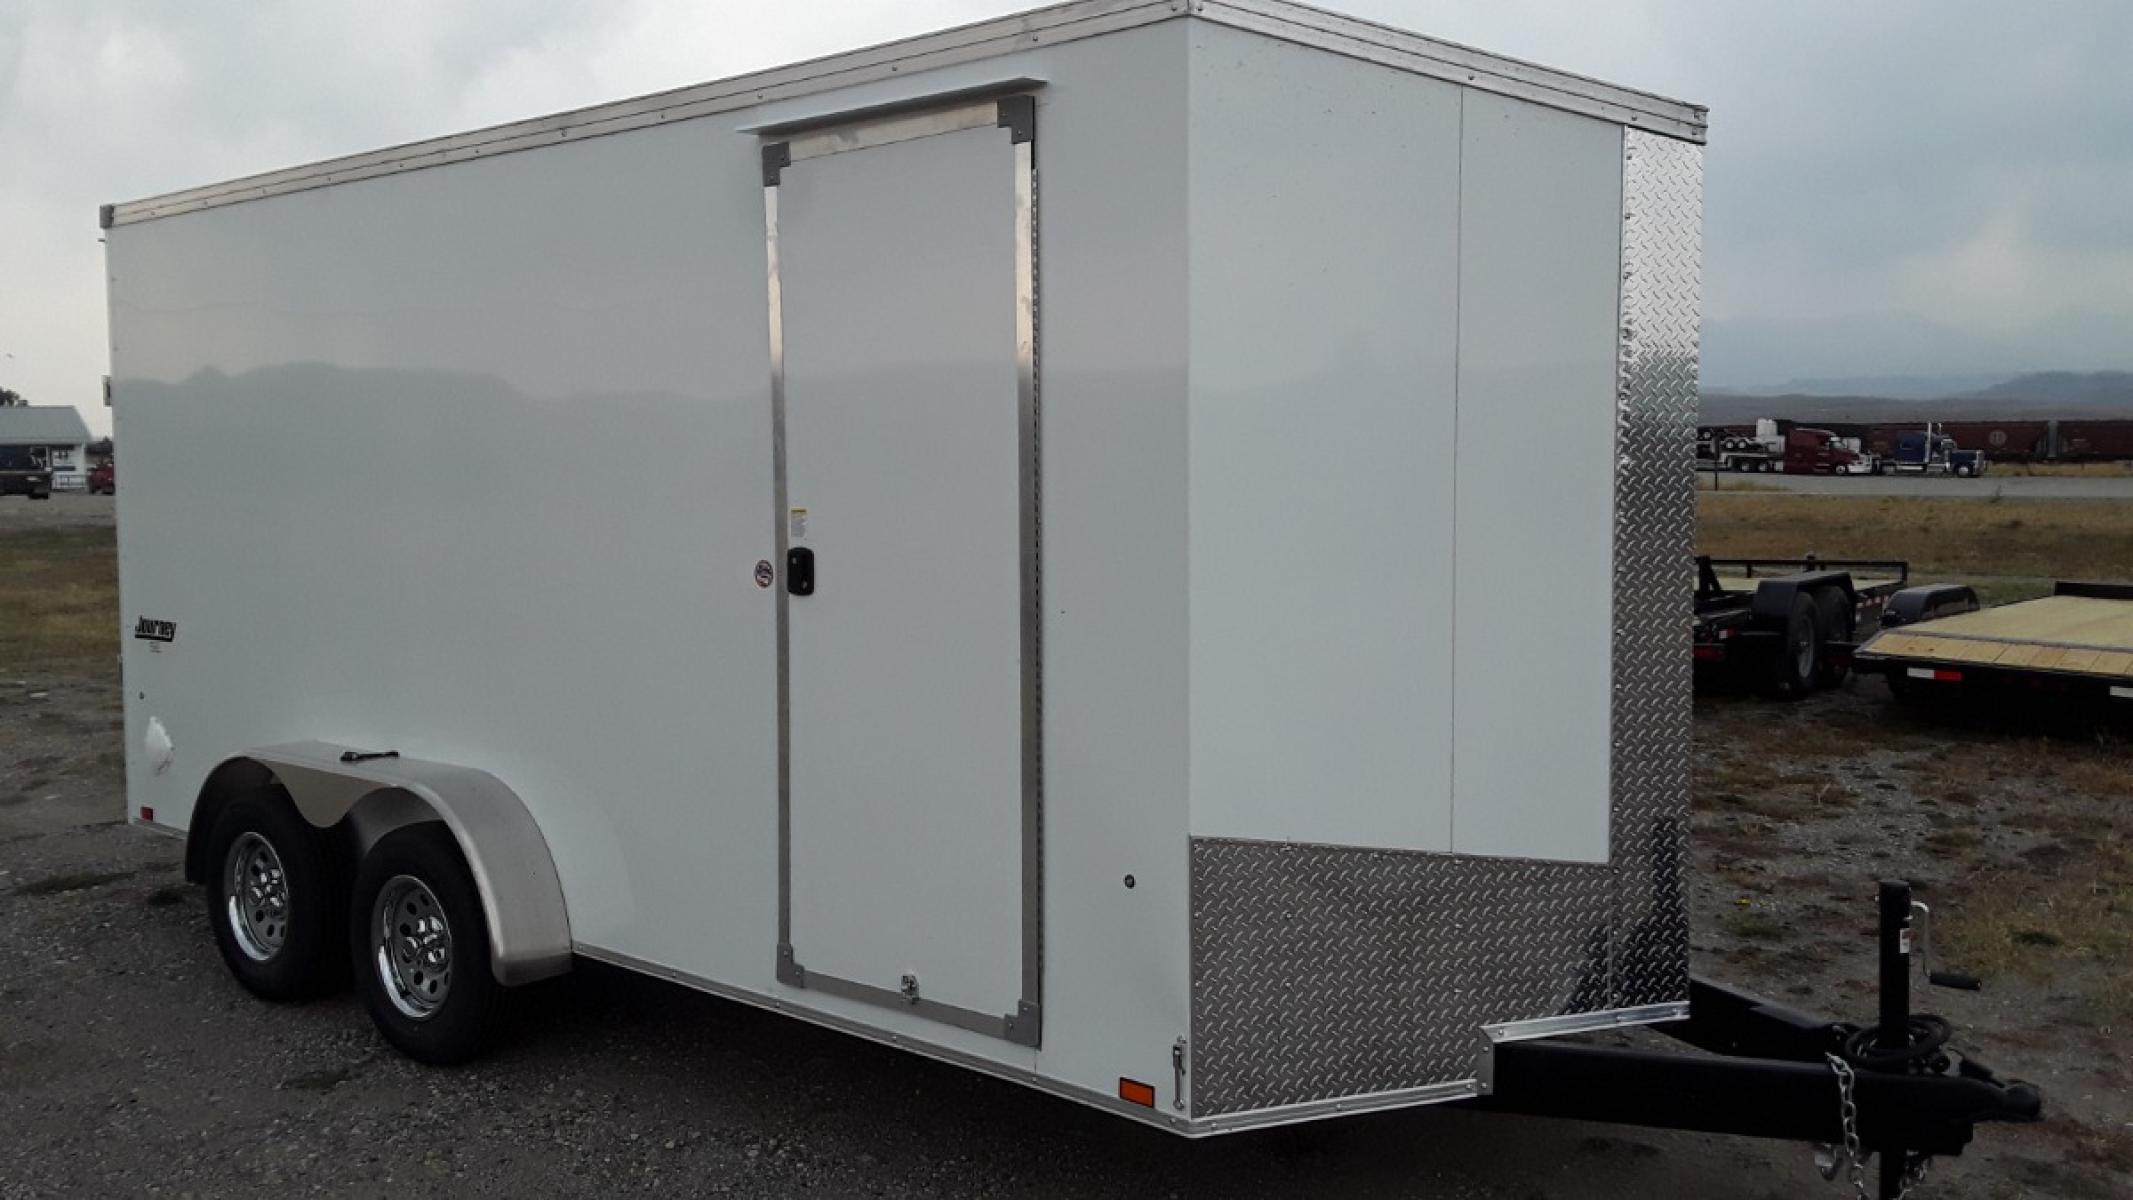 2022 Pewter Pace 7 x 16 Journey SE , located at 310 West 1st Ave, Big Timber, MT, 59011, (406) 860-8510, 45.833511, -109.957809 - NEW PACE 7 X 16 JOURNEY SE V-NOSE CARGO TRAILER, 7K GVW, 78" REAR OPENING DOOR HEIGHT, TUBE SIDEWALL SUPPORTS ON 16" CENTERS, FLOOR CROSSMEMBERS ON 16" CENTERS, SCREWLESS EXTERIOR, TUBE FRAME CONSTRUCTION W- 3 YEAR WARRANTY, 15" RADIAL TIRES, EZ LUB HUBS, REAR RAMP DOOR, FLUSH MOUNTED RV SIDE DOOR W - Photo #2